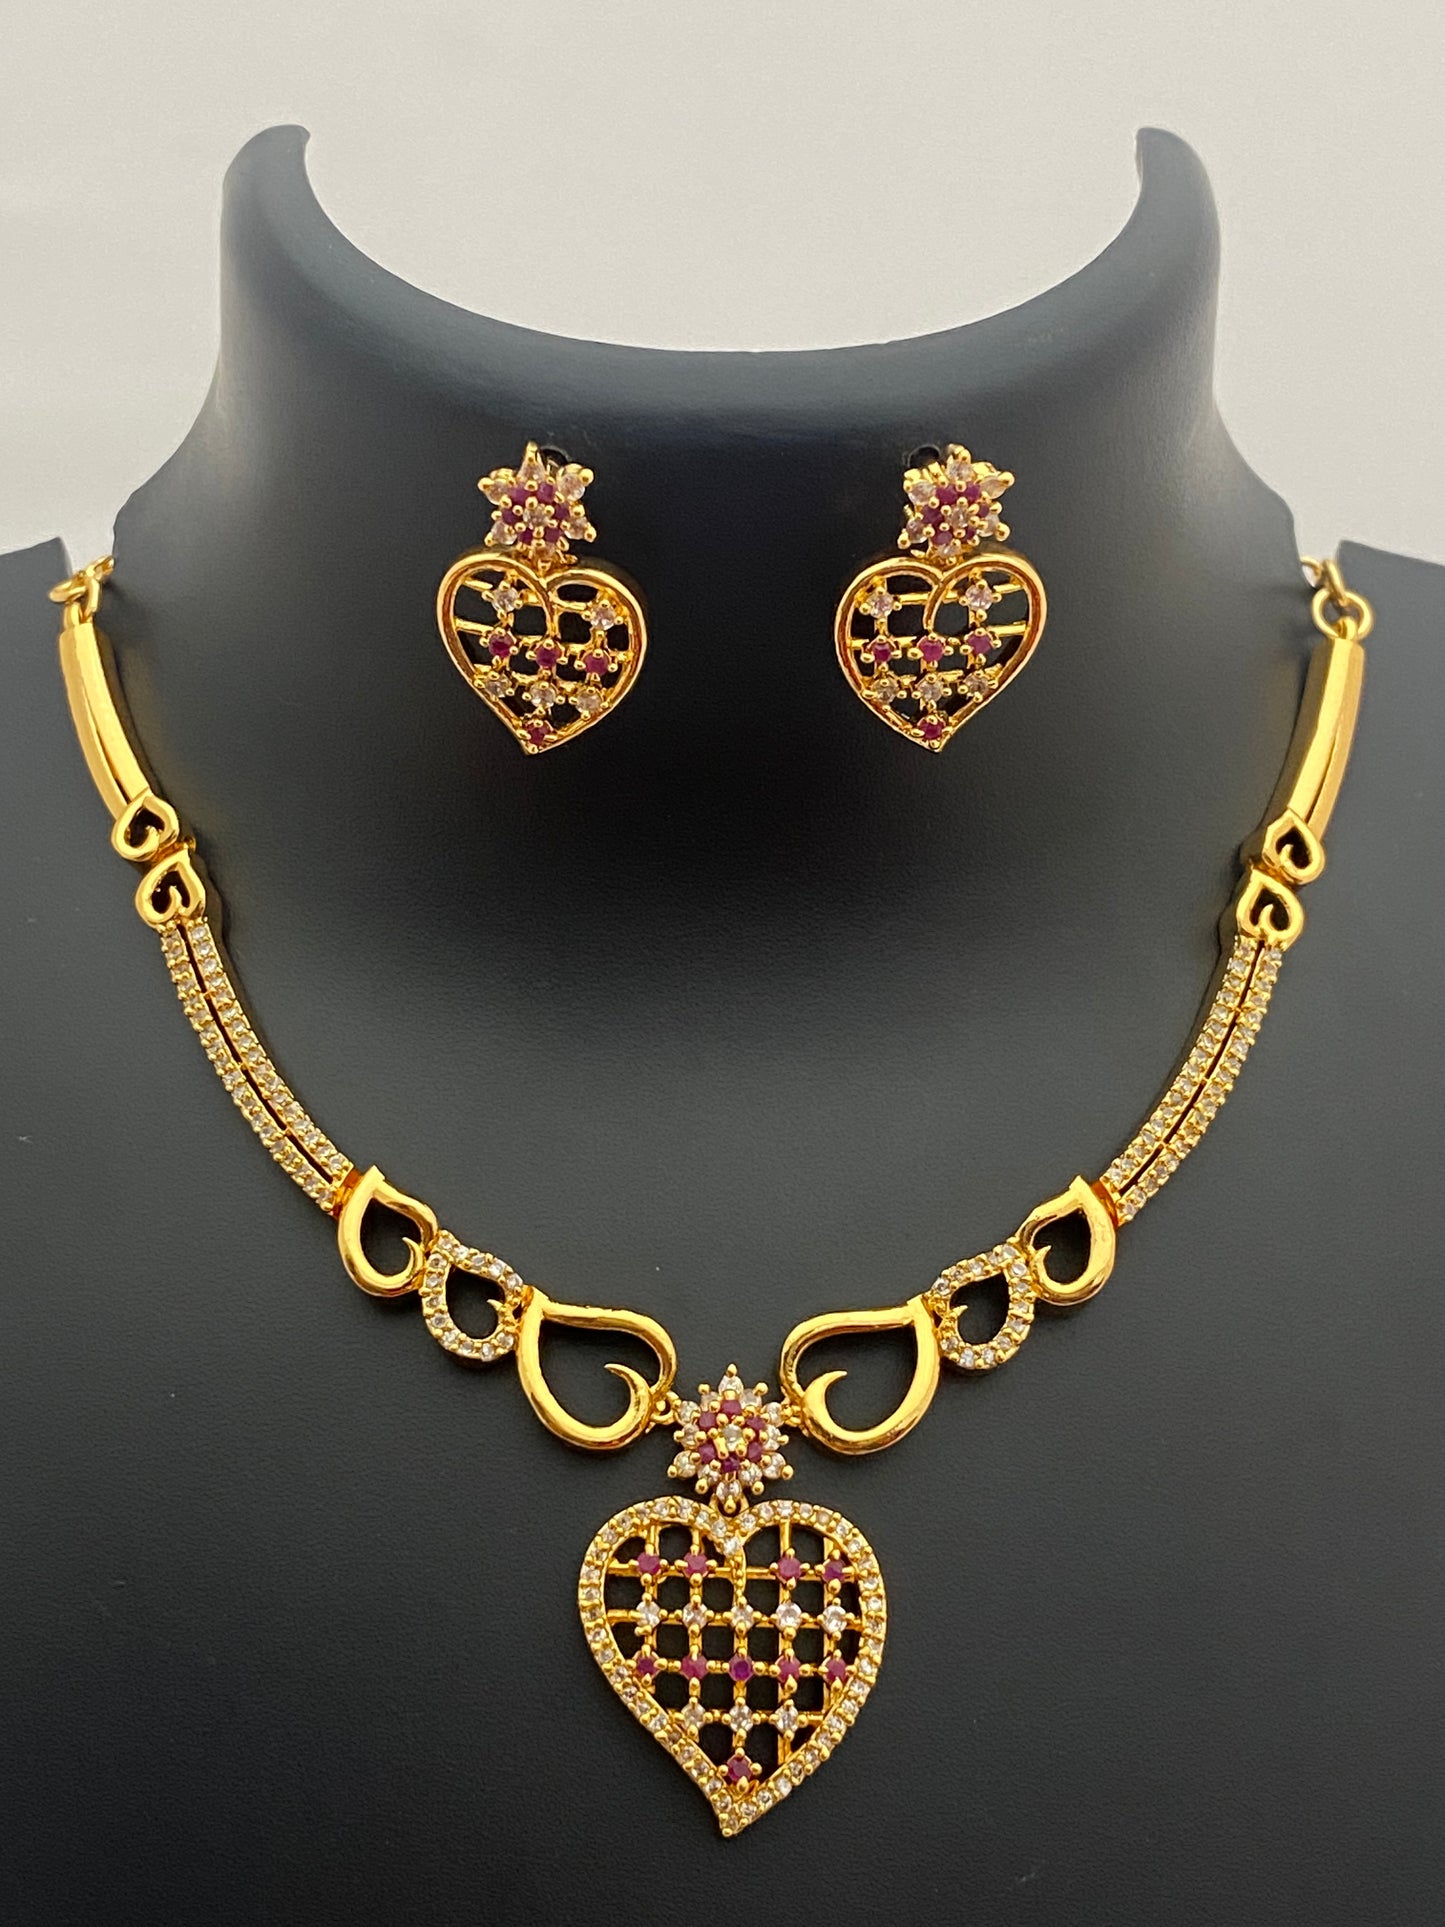 Lovely Heart Designed Gold Plated Necklace And Earrings With Ruby And White Stones